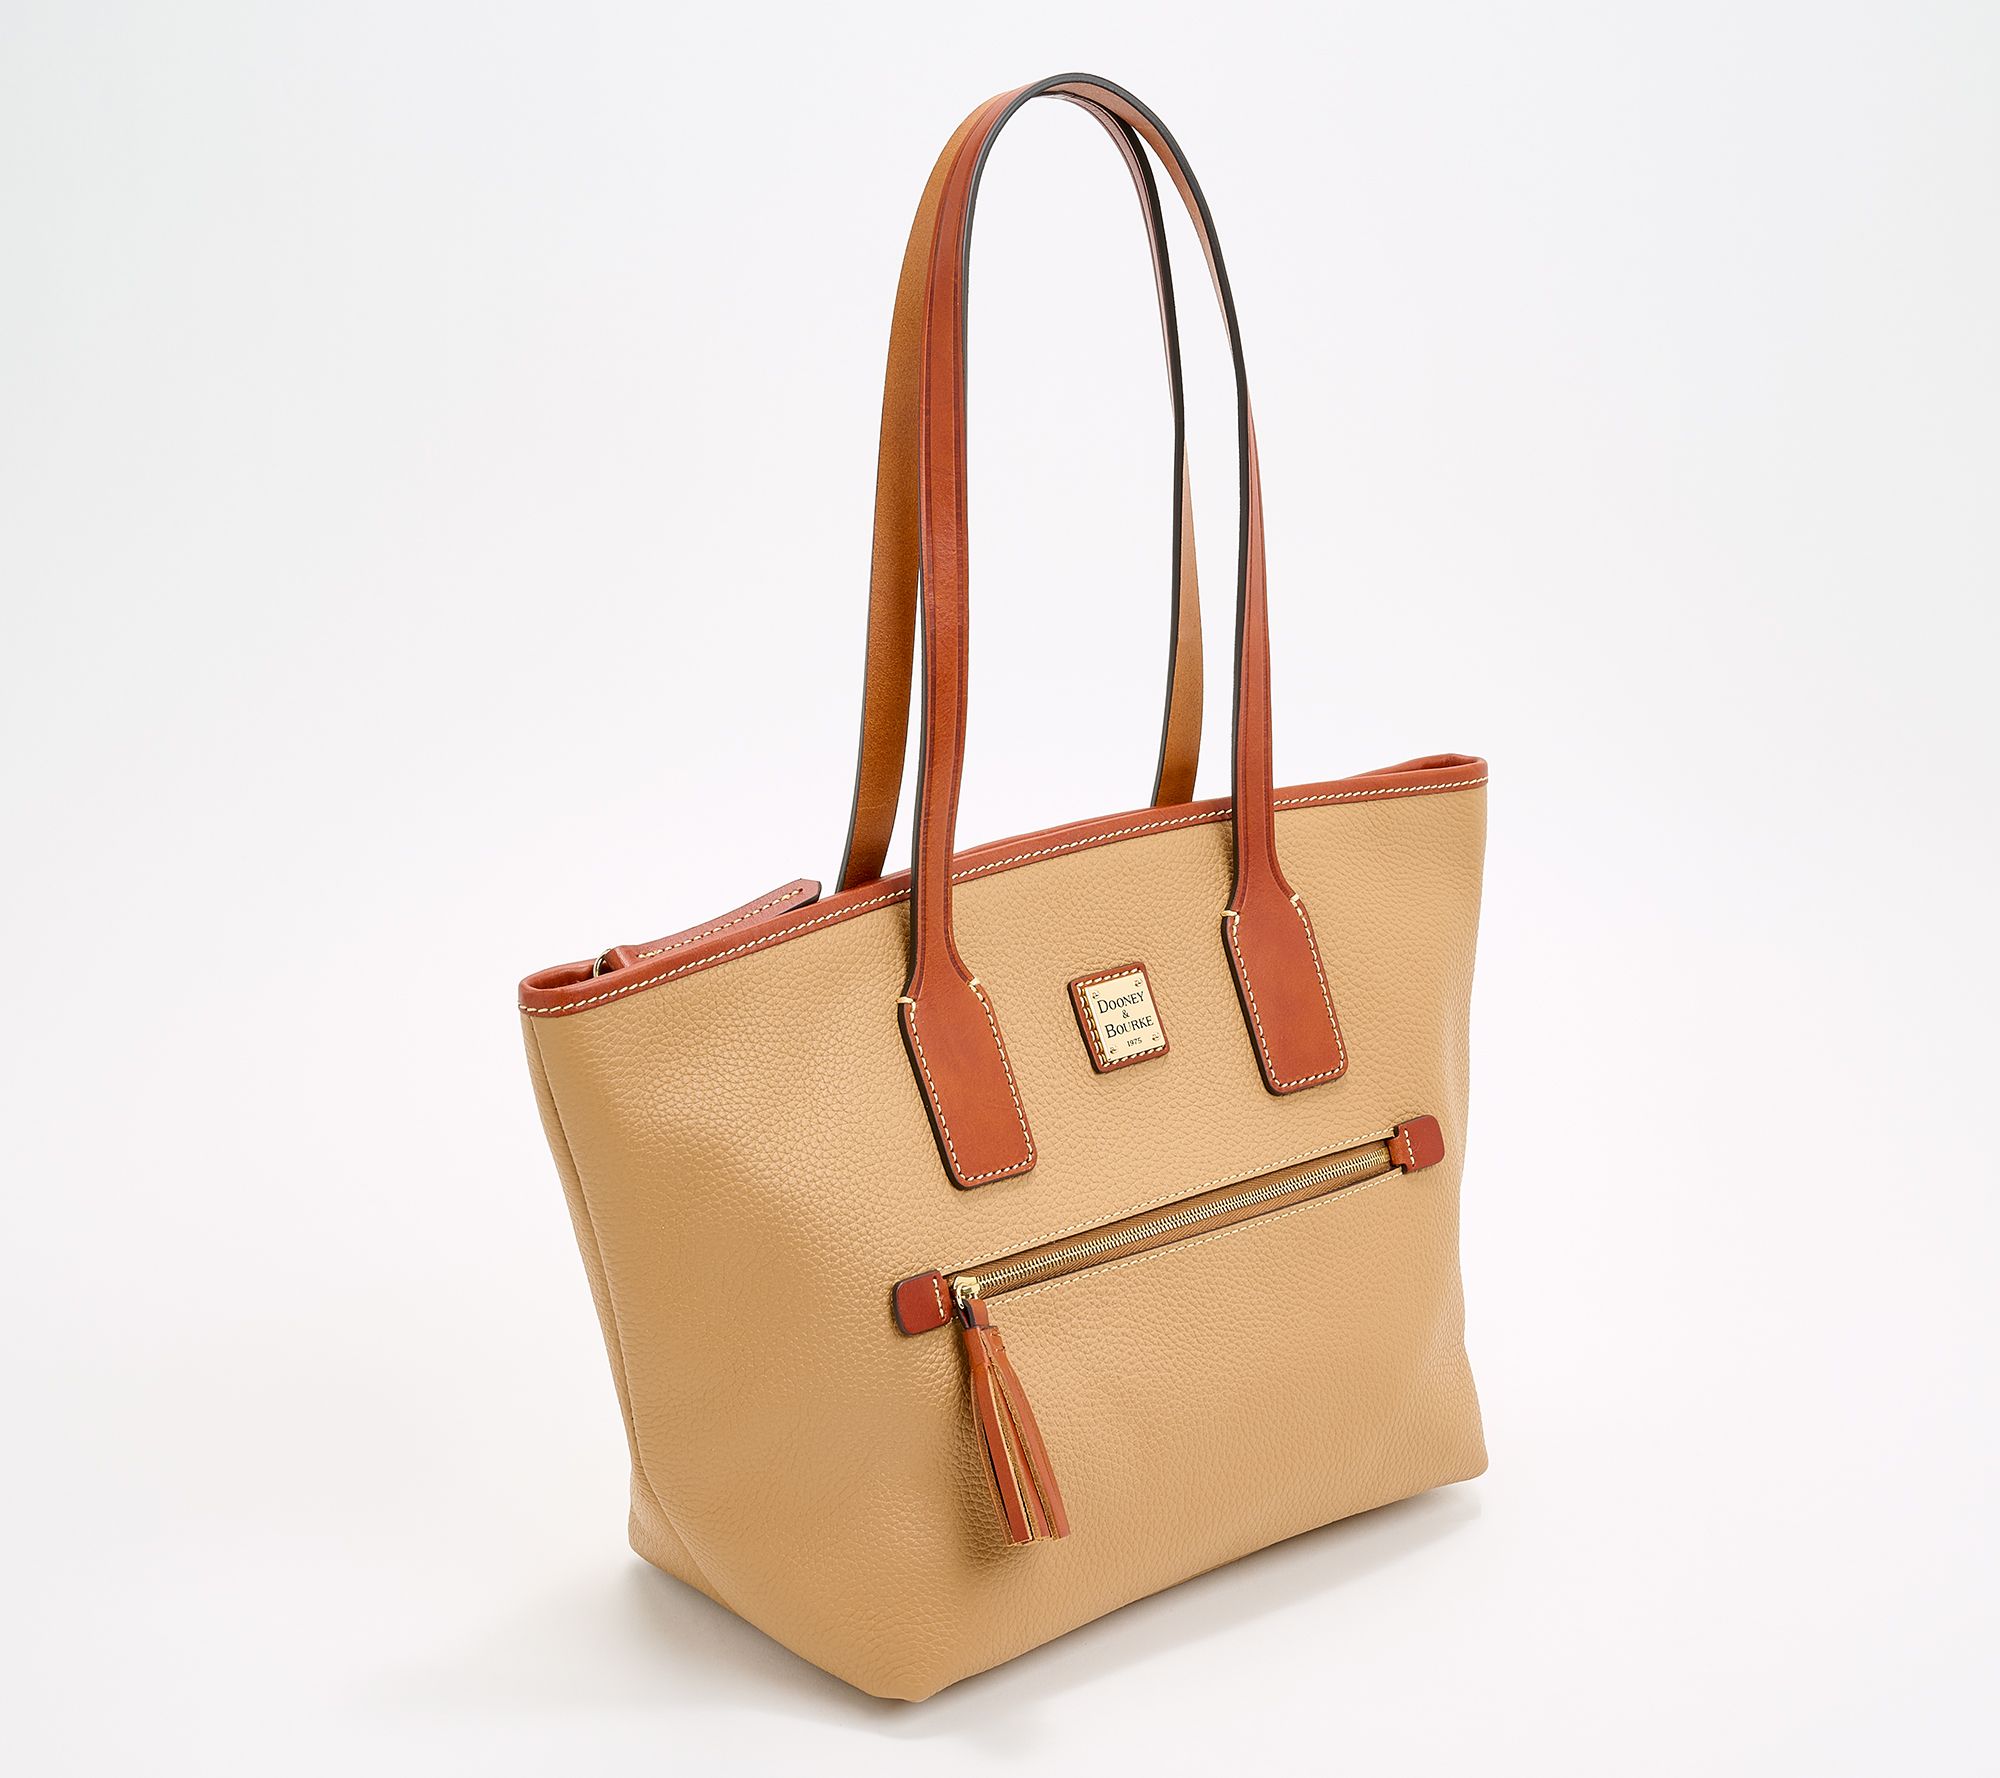 Dooney & Bourke Small Pebble Leather Tote